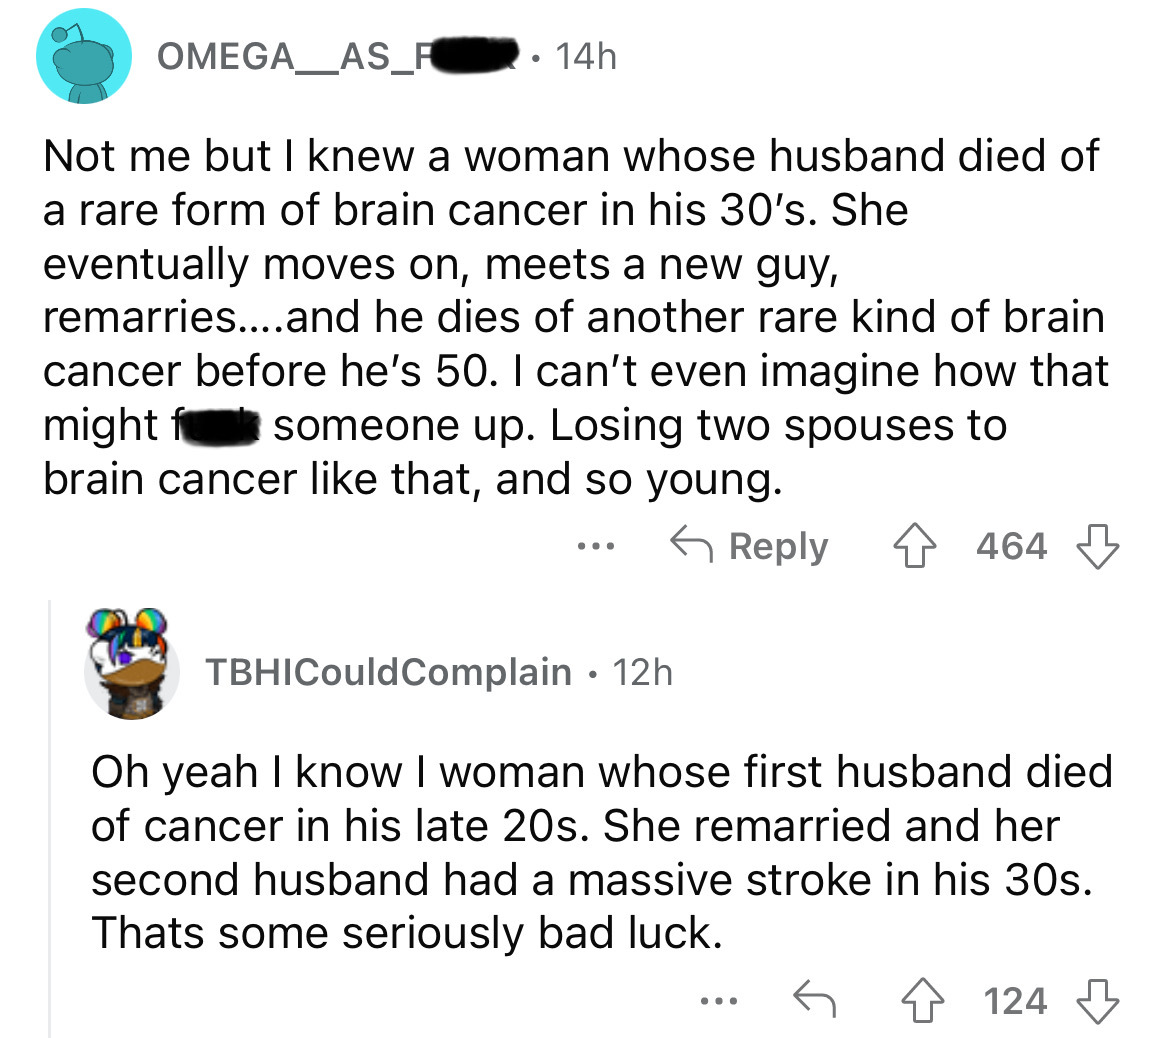 dmc 5 journalist music - OMEGA_AS_F .14h Not me but I knew a woman whose husband died of a rare form of brain cancer in his 30's. She eventually moves on, meets a new guy, remarries....and he dies of another rare kind of brain cancer before he's 50. I can